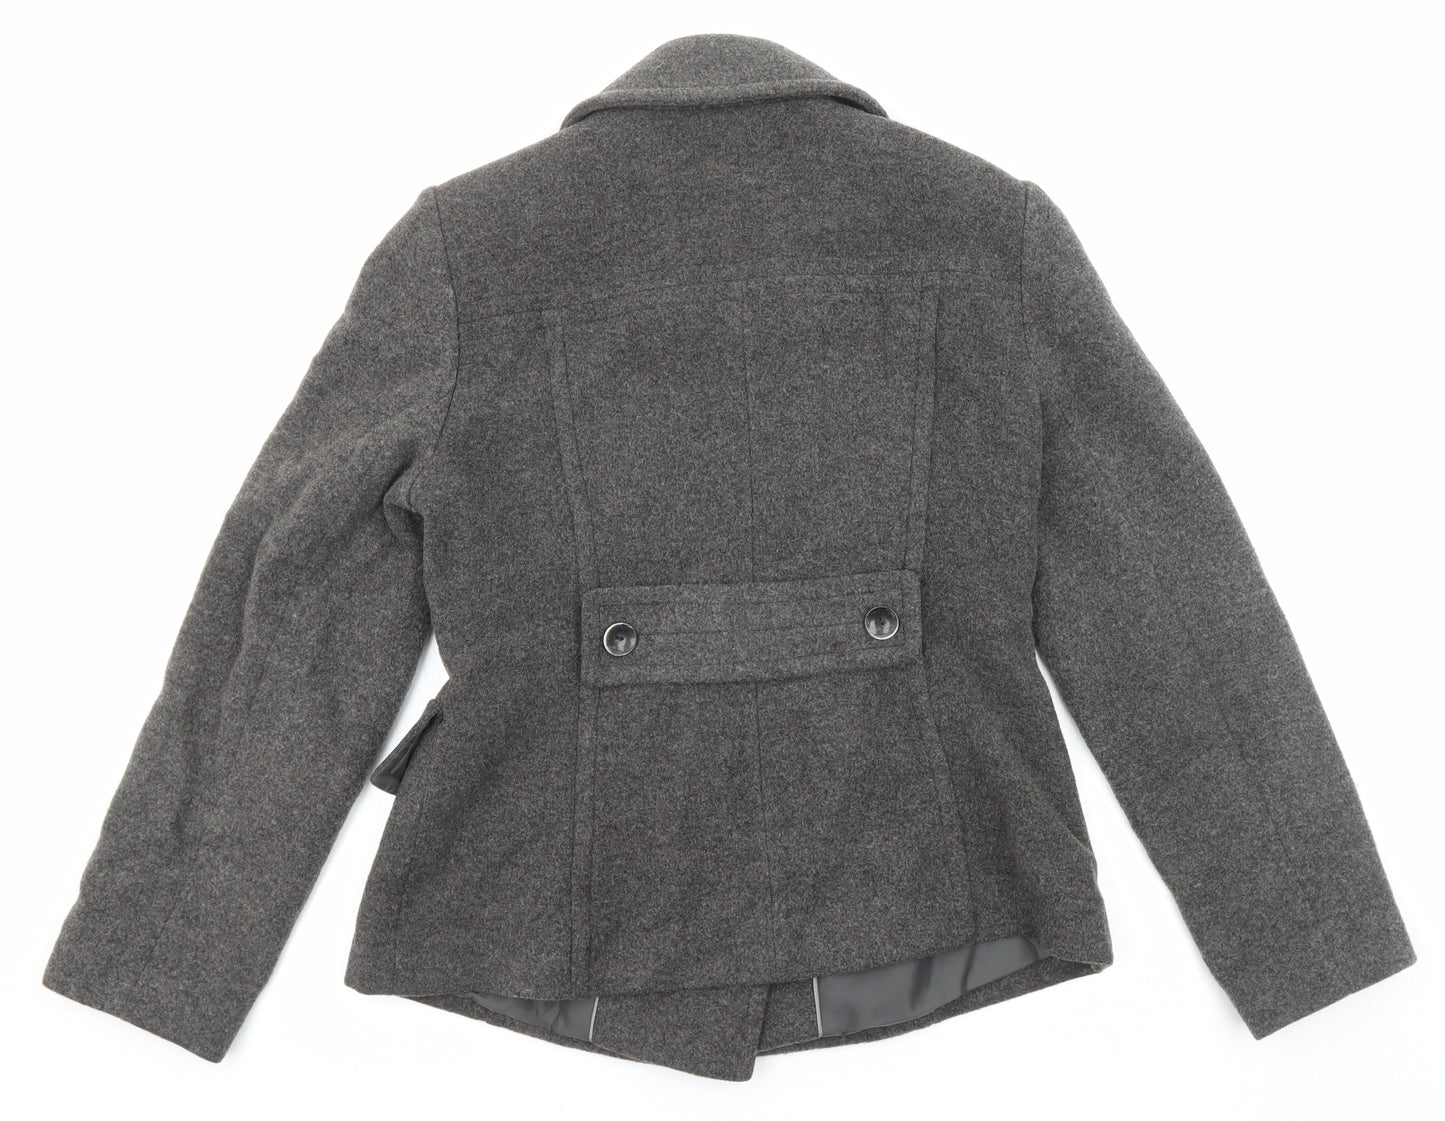 Marks and Spencer Womens Grey Pea Coat Coat Size 12 Button